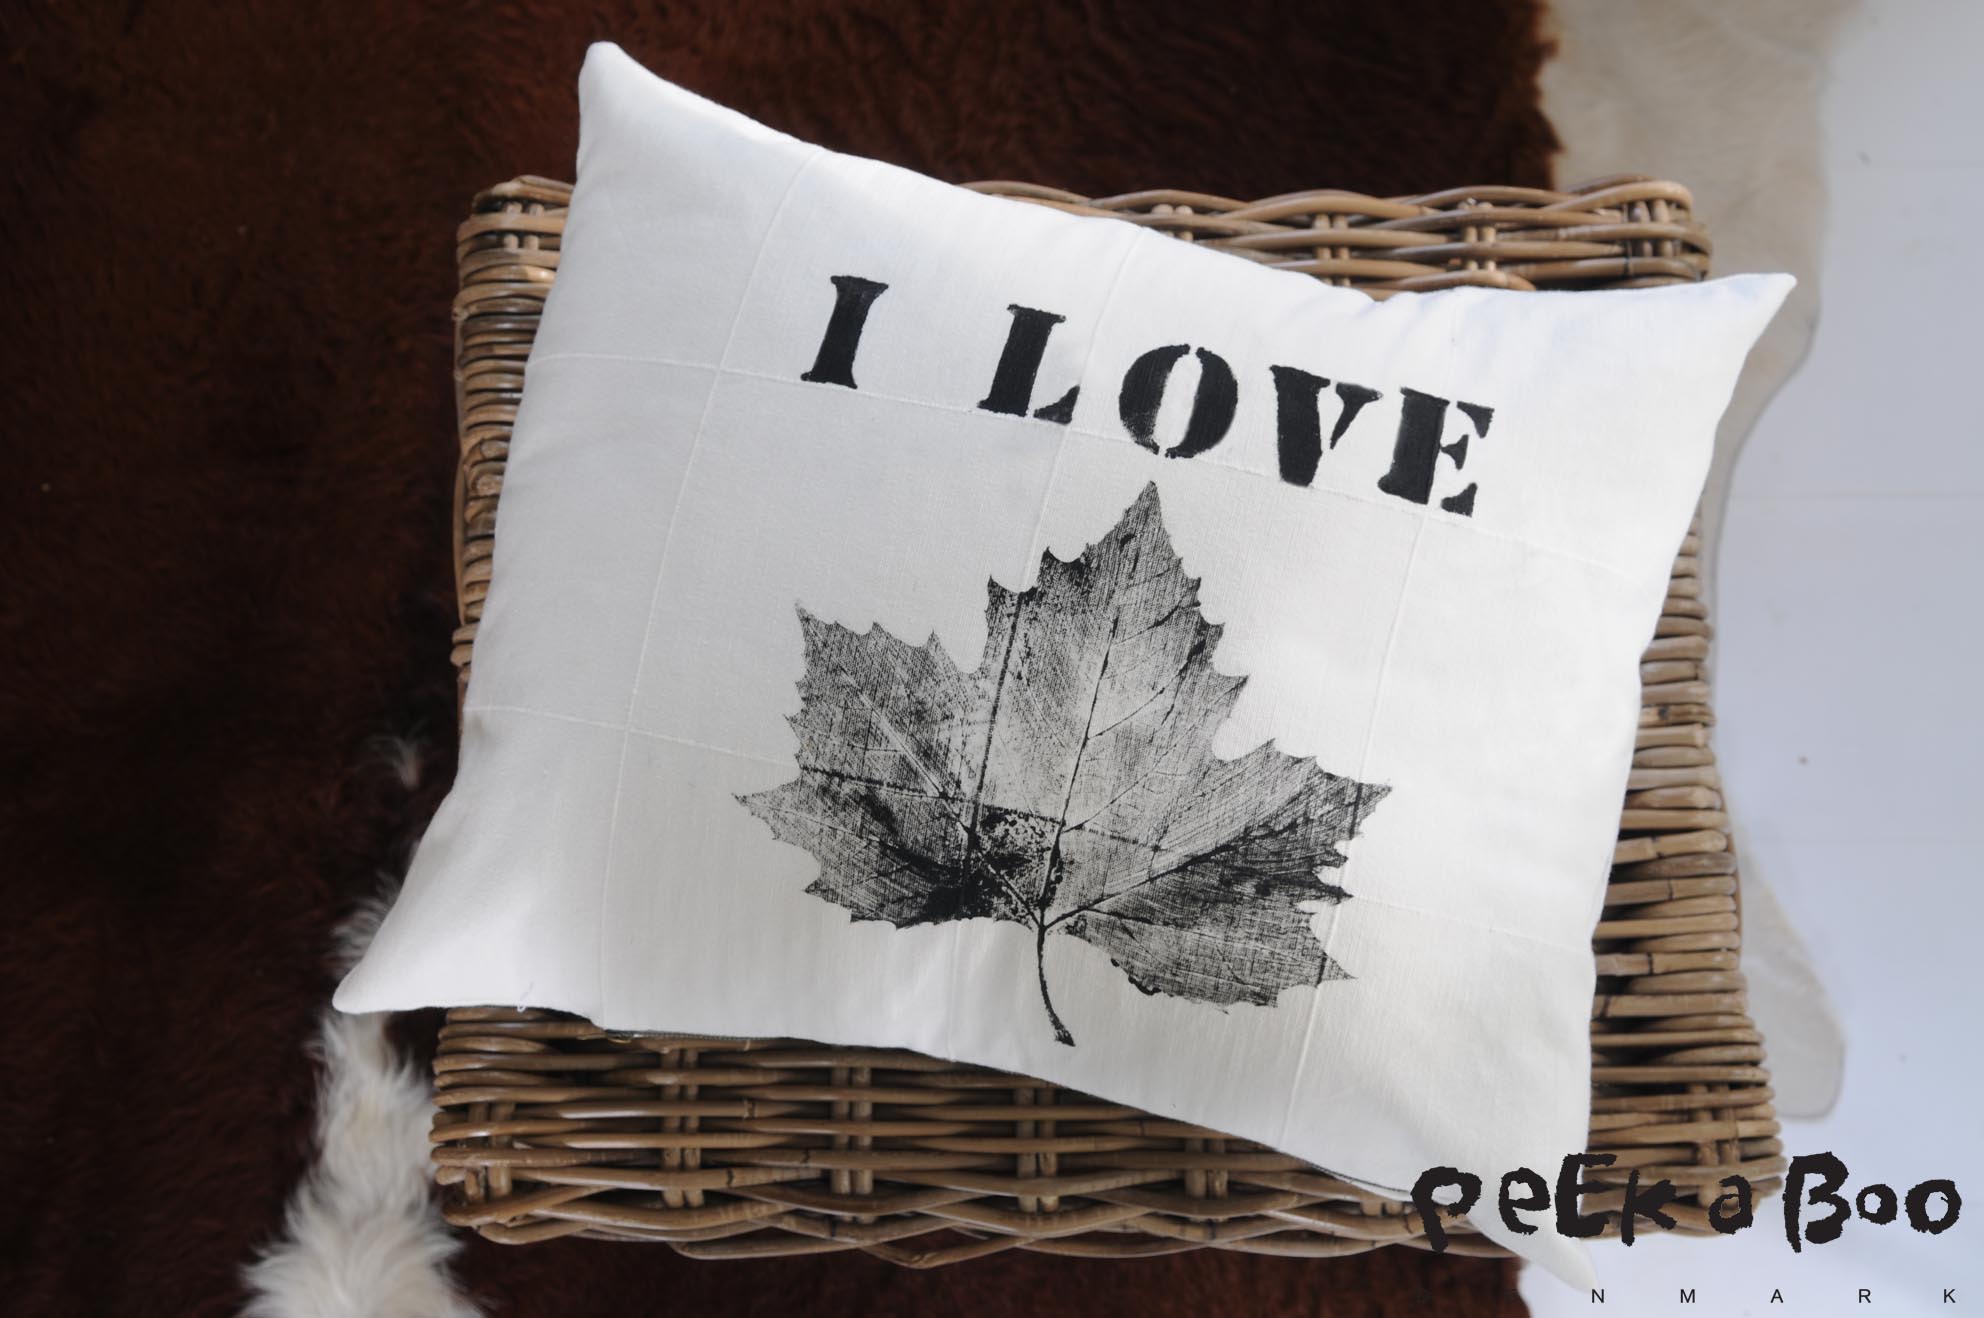 Pillowcase printed with leaf and stencil letters.